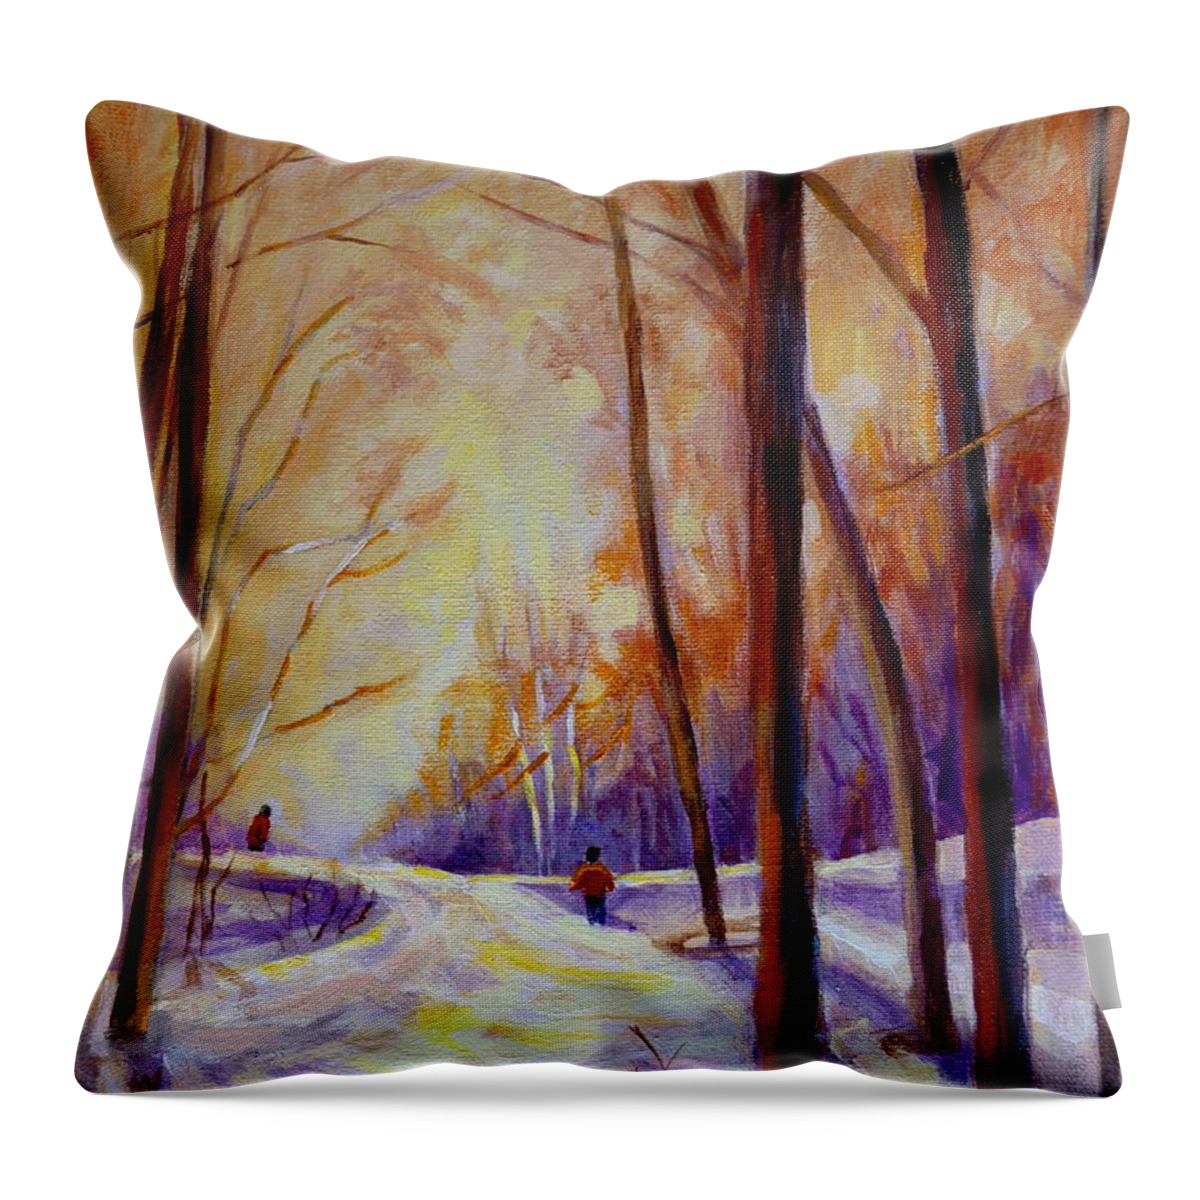 Cross Country Siing St. Agathe Quebec Throw Pillow featuring the painting Cross Country Sking St. Agathe Quebec by Carole Spandau